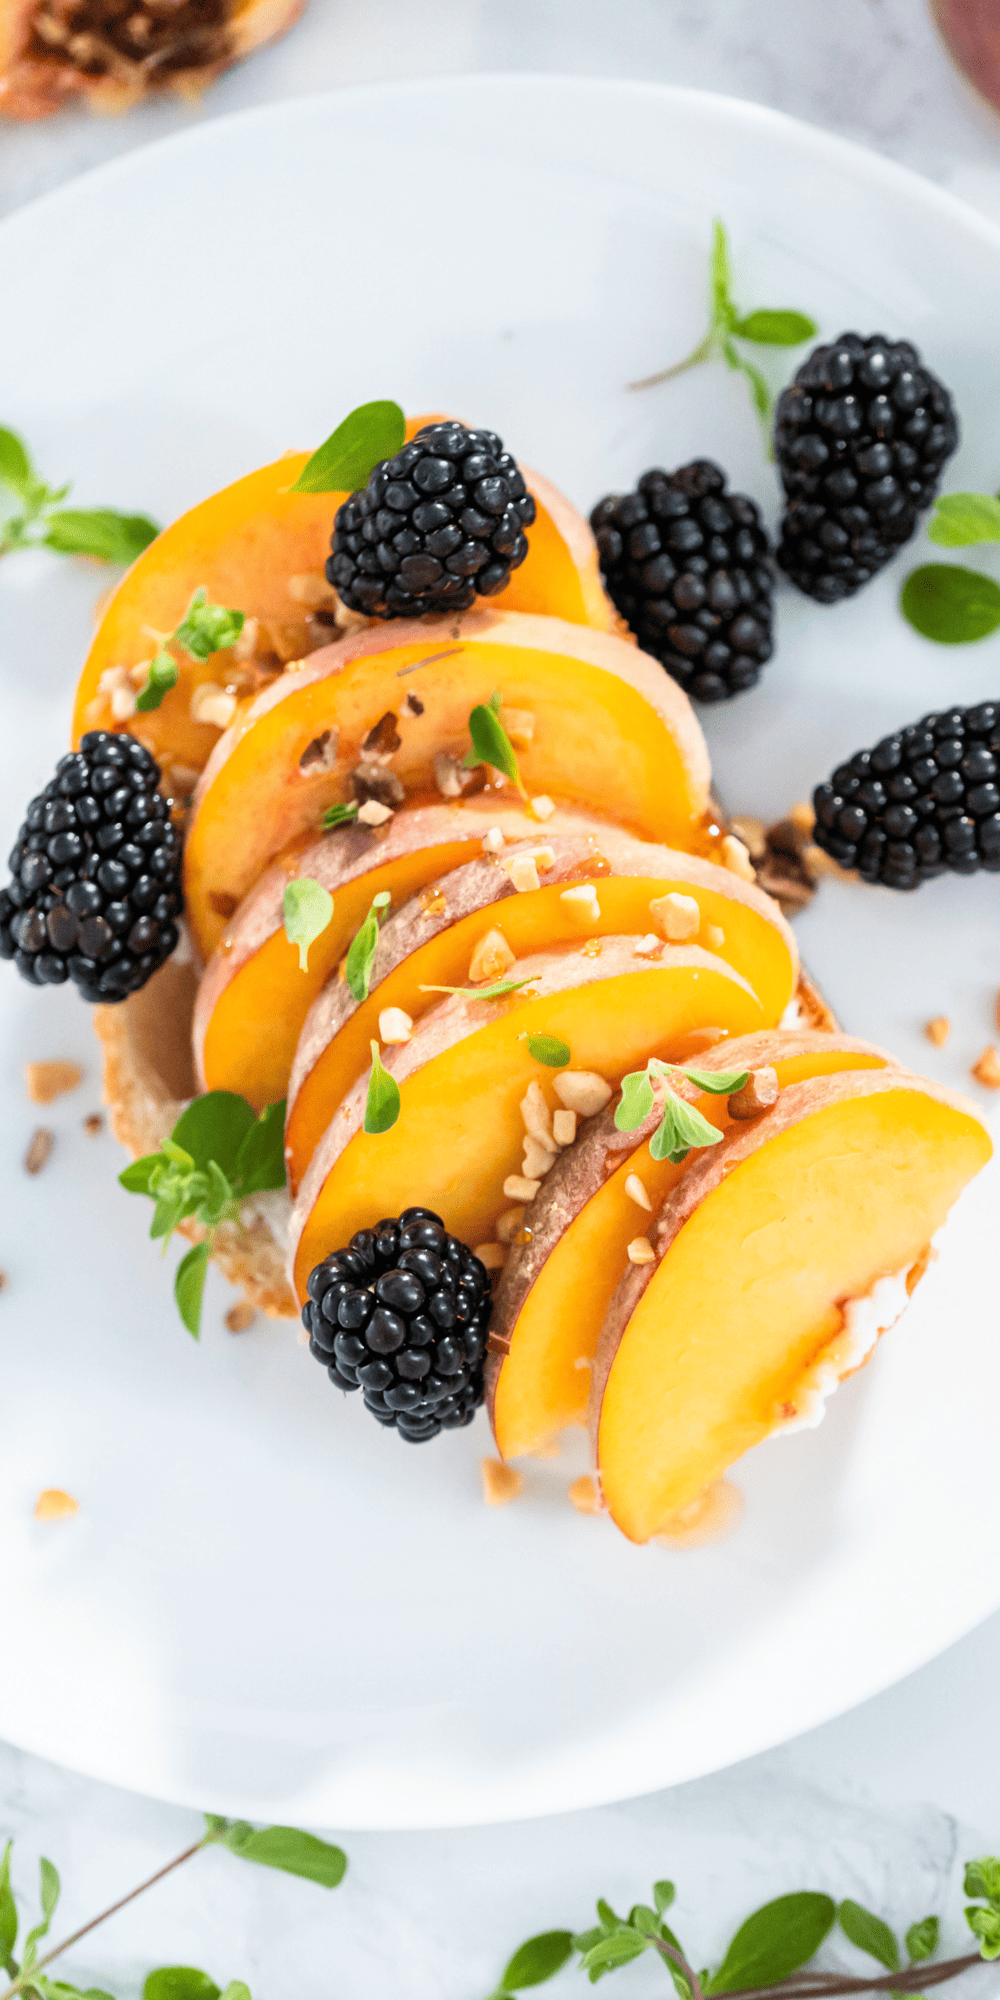 A toast with whipped ricotta with honey, peaches, and nuts.